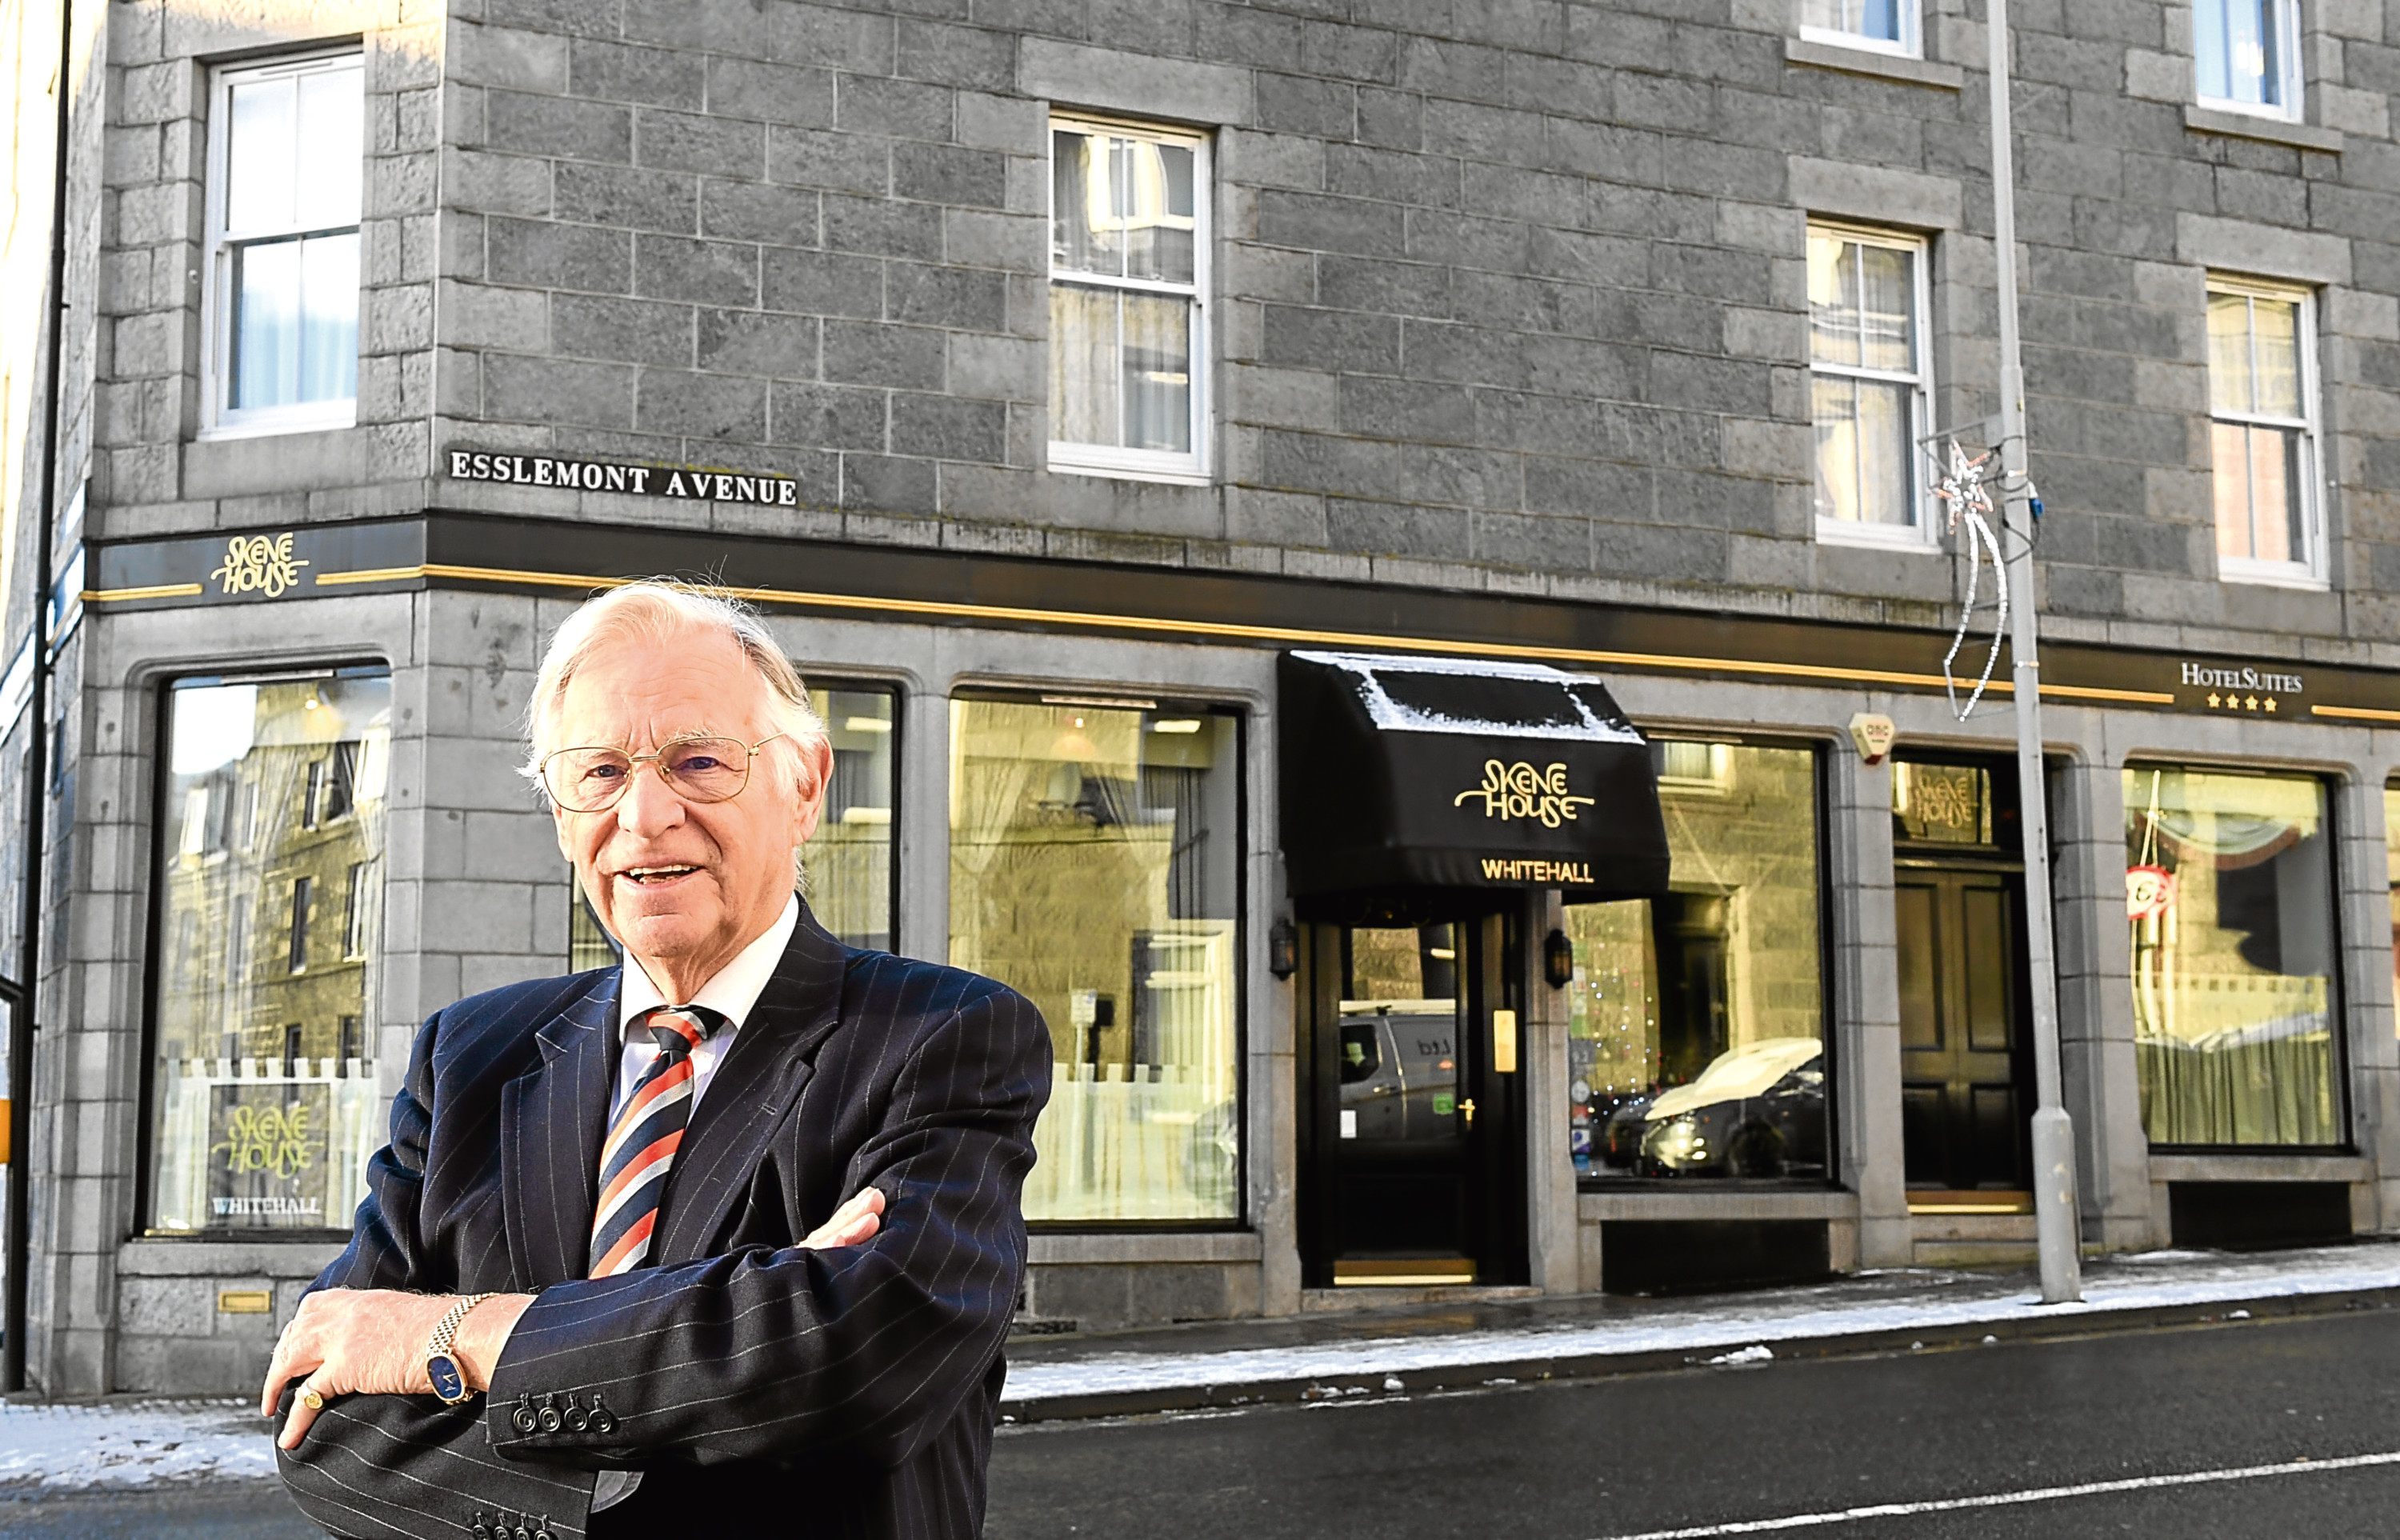 Business ; 
Charles Skene owner of Skene House, pictured at his Whitehall Place, opetration.     .....see story Rebecca Buchan.      
Picture by Kami Thomson    11-12-17